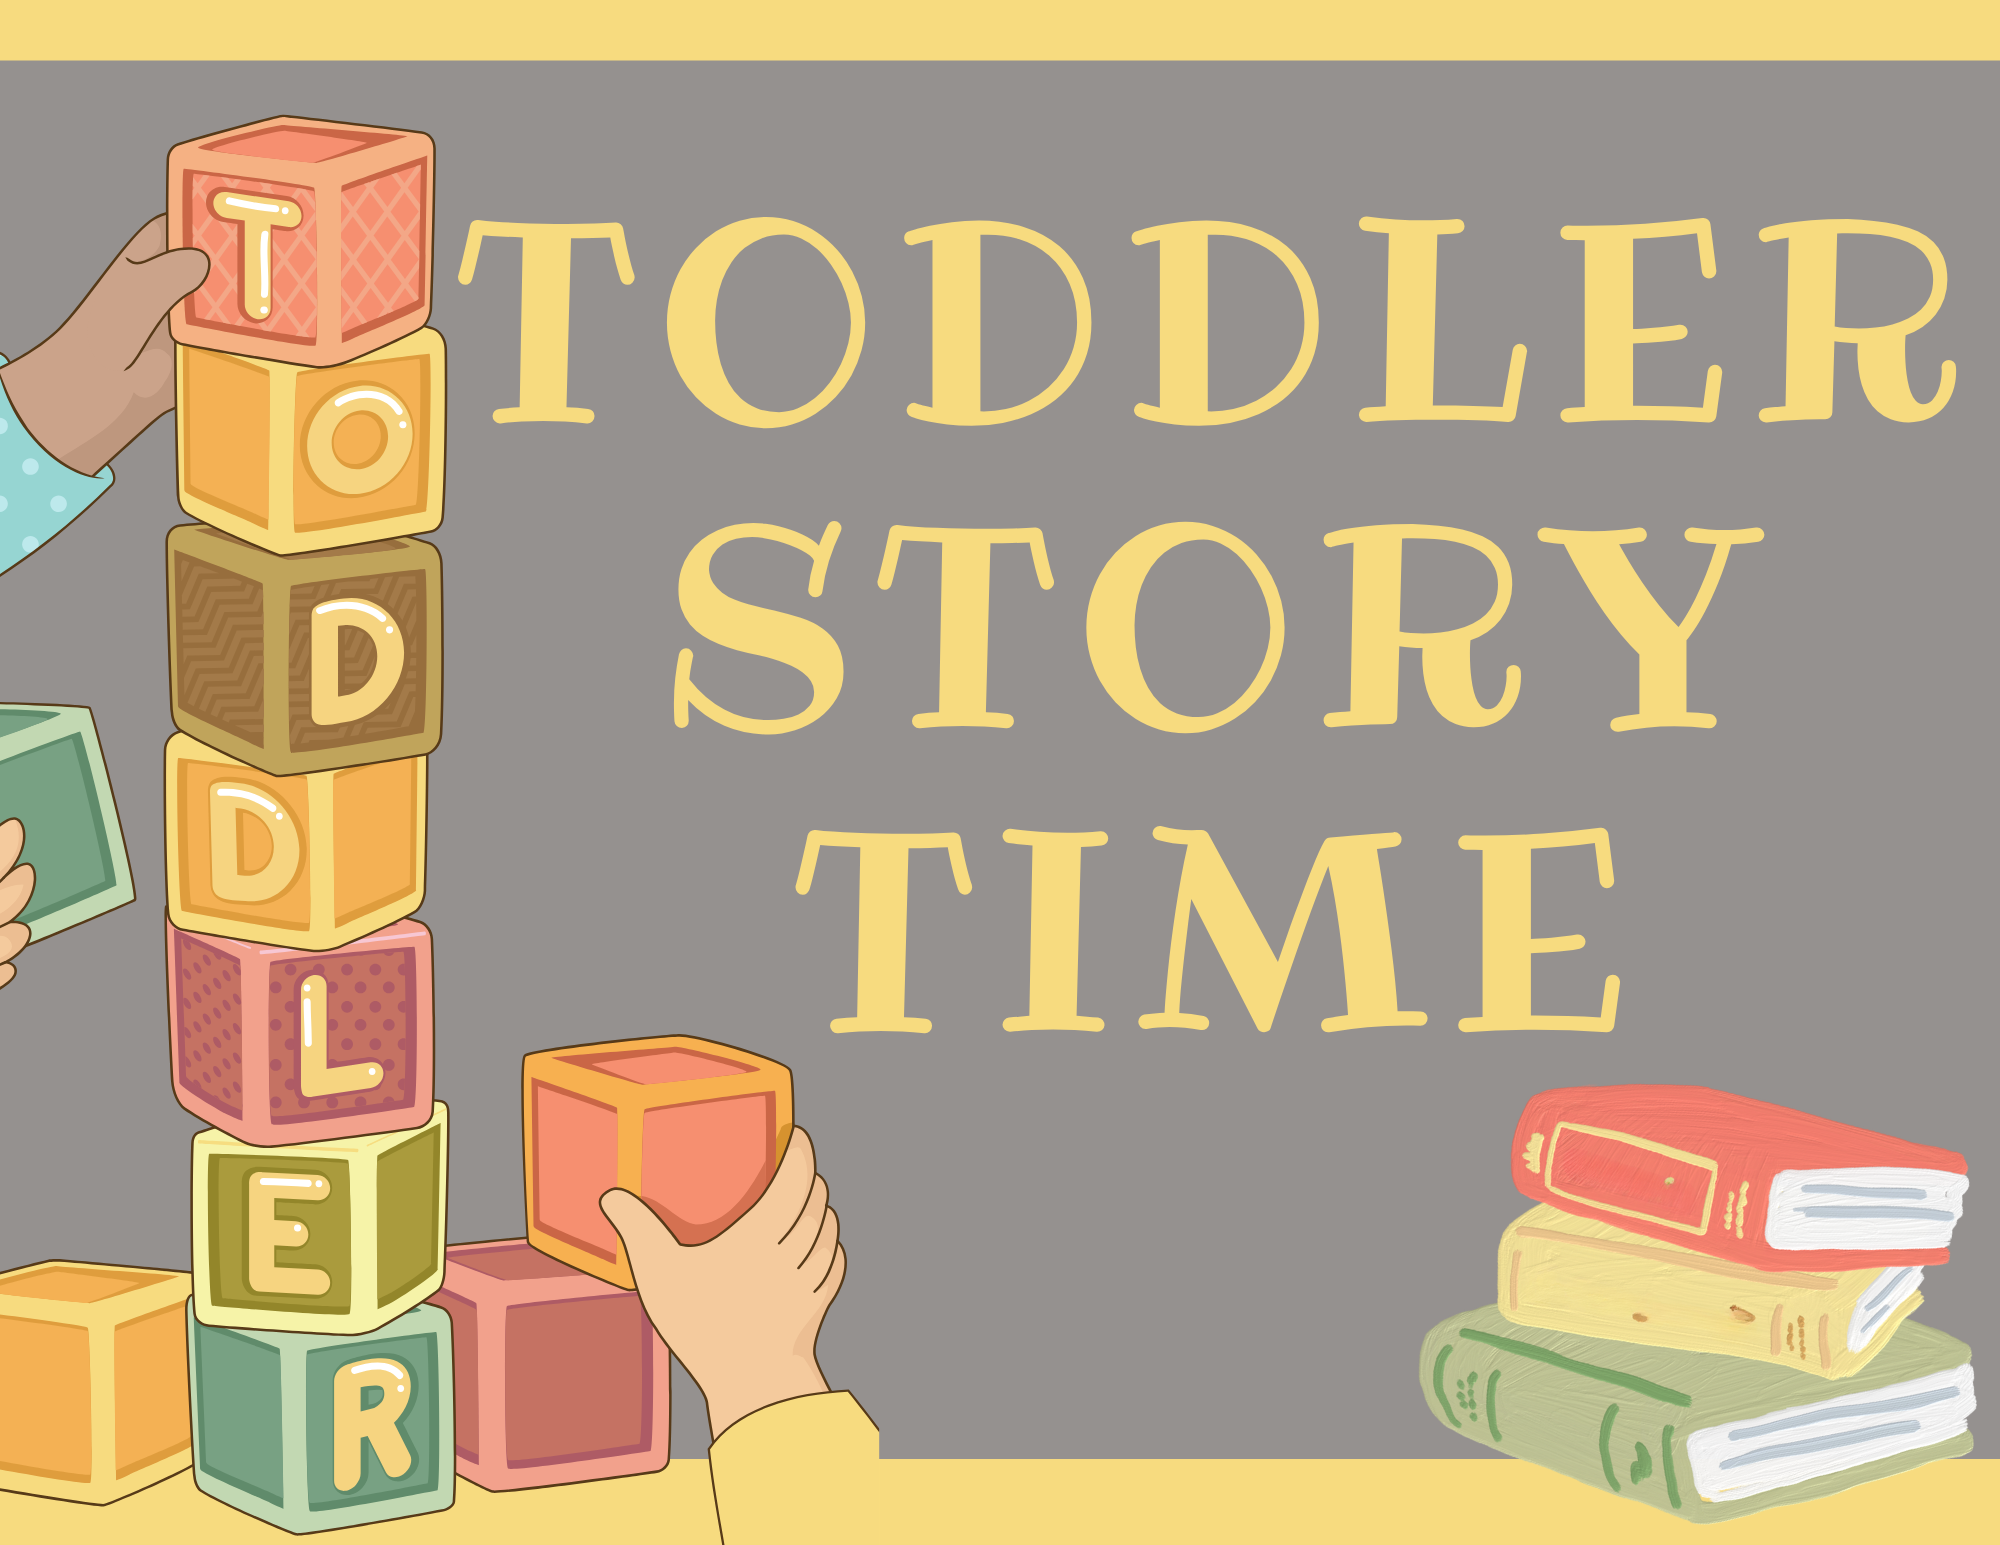 Toddler Story Time